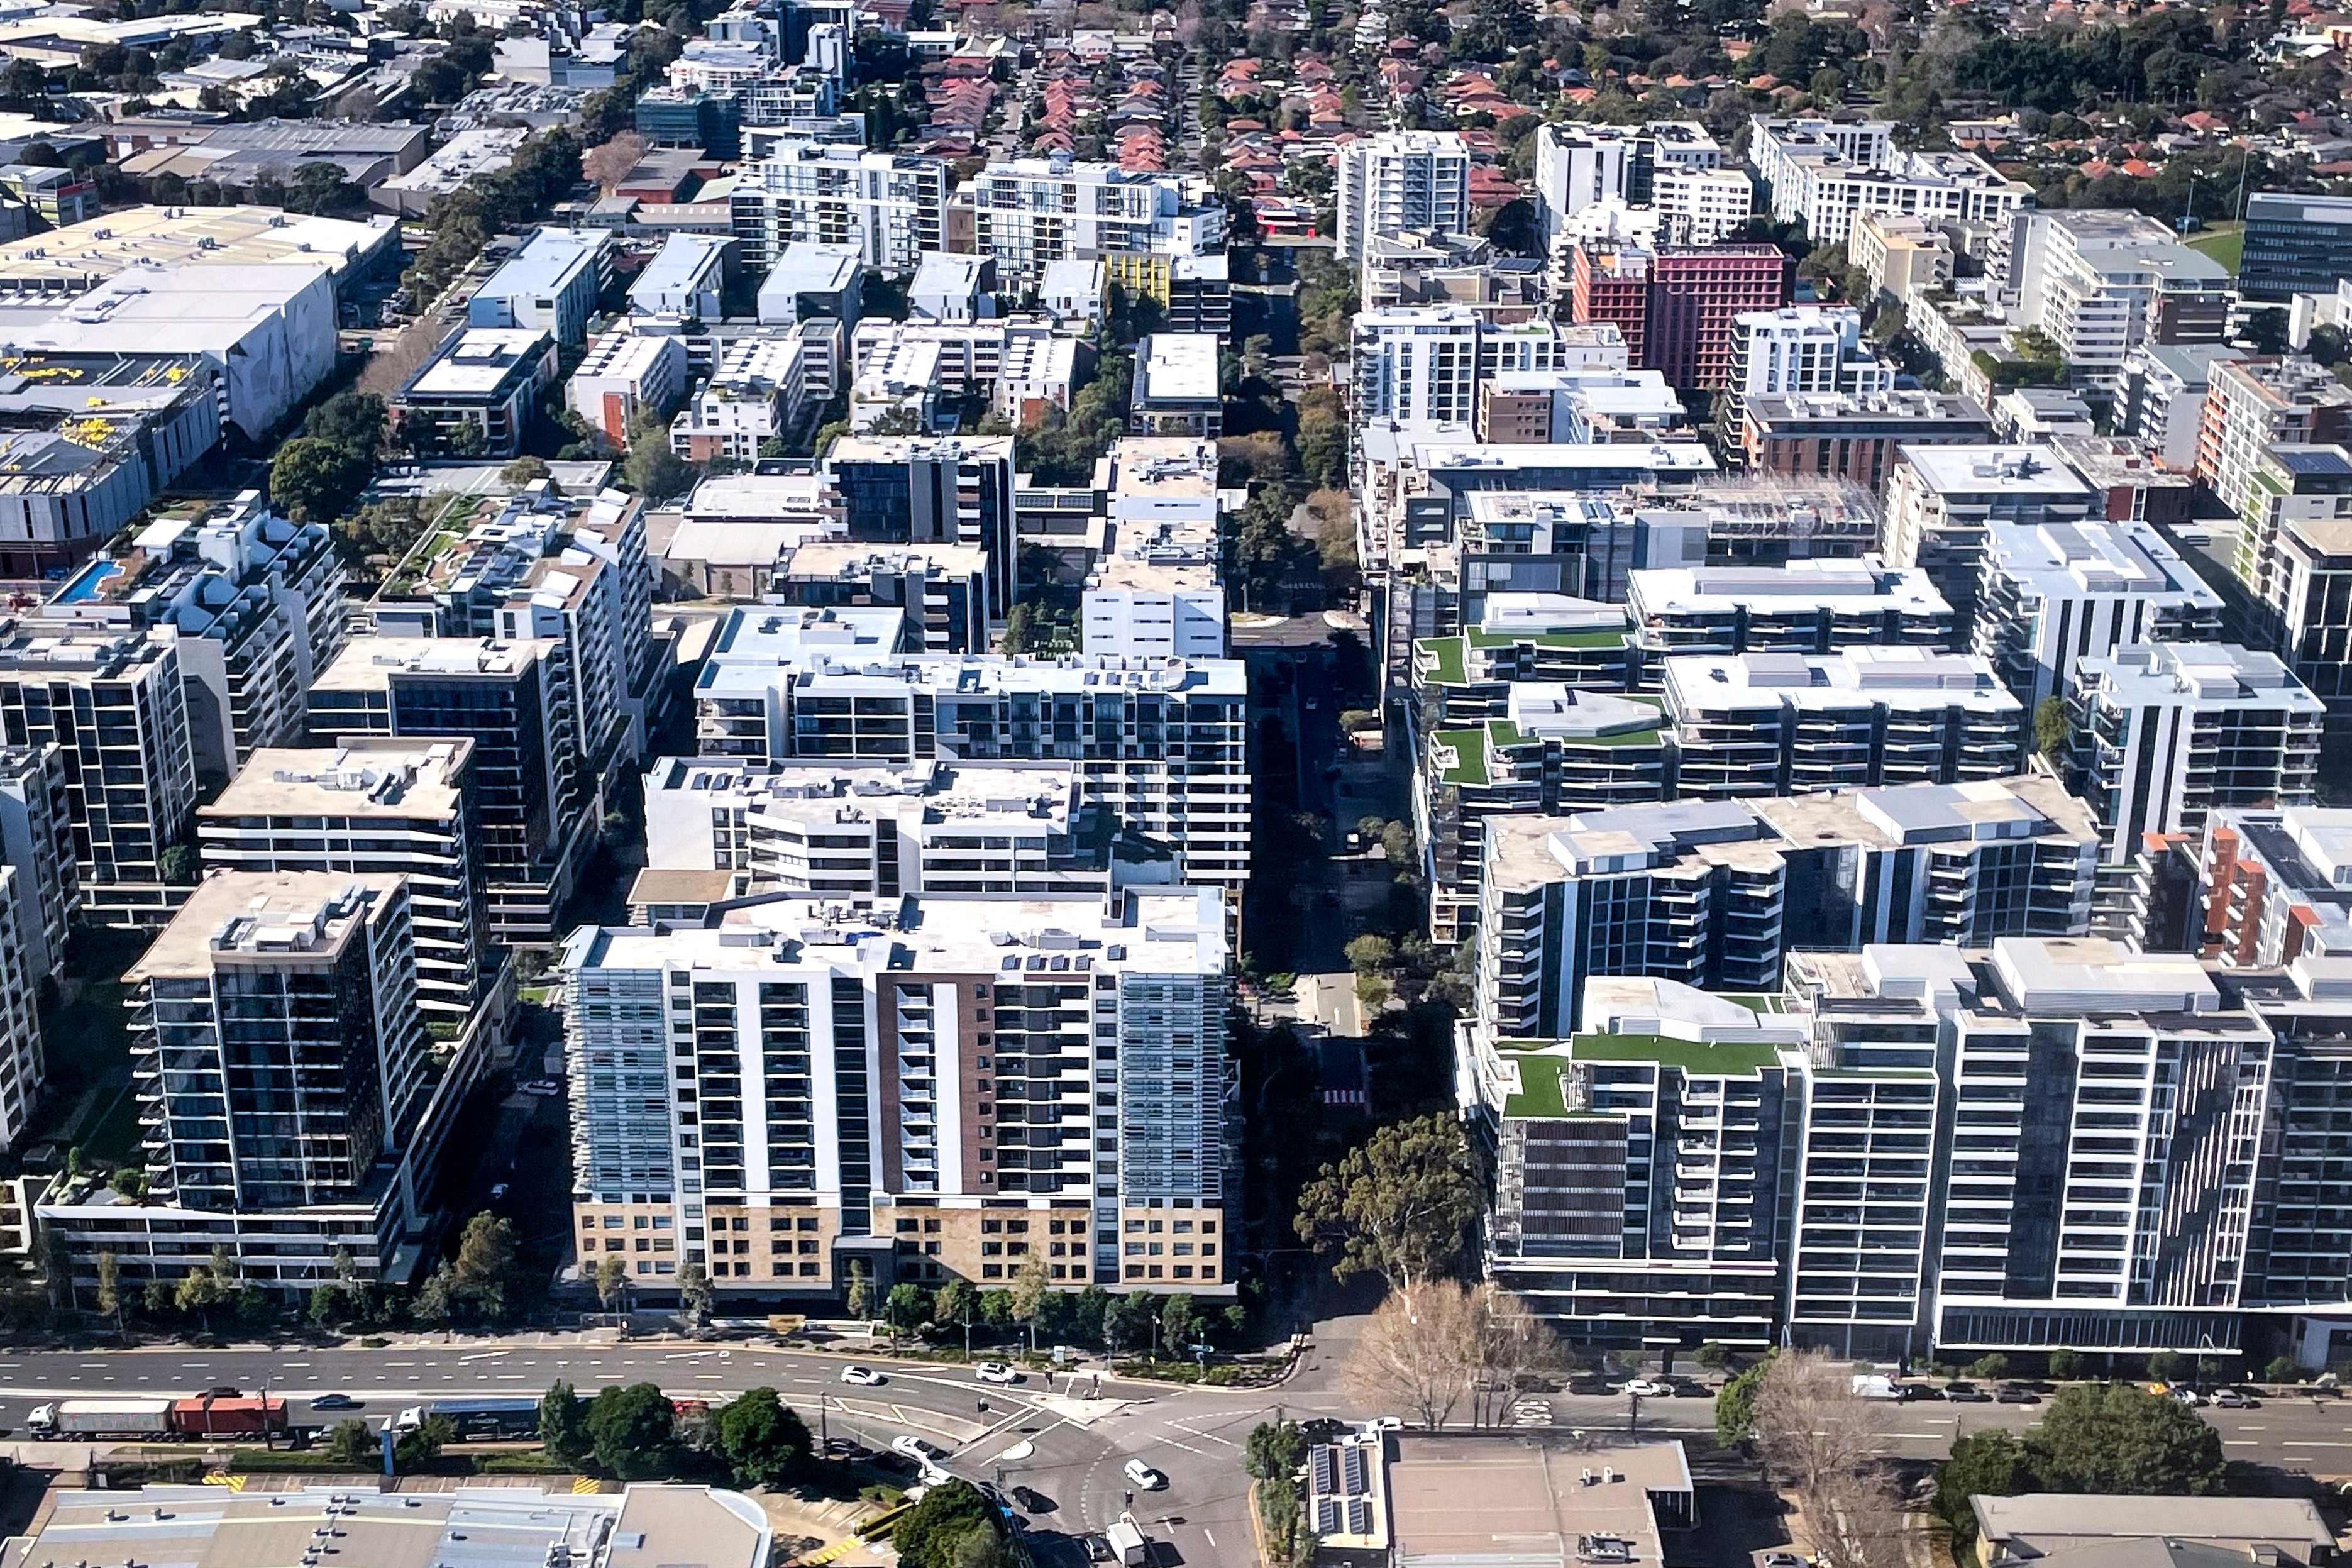 Newly constructed blocks of flats in the Sydney suburb of Mascot are seen on June 16. Addressing the chronic issue of housing affordability in Australia has been hampered by what some see as overly restrictive planning and zoning laws. Photo: AFP